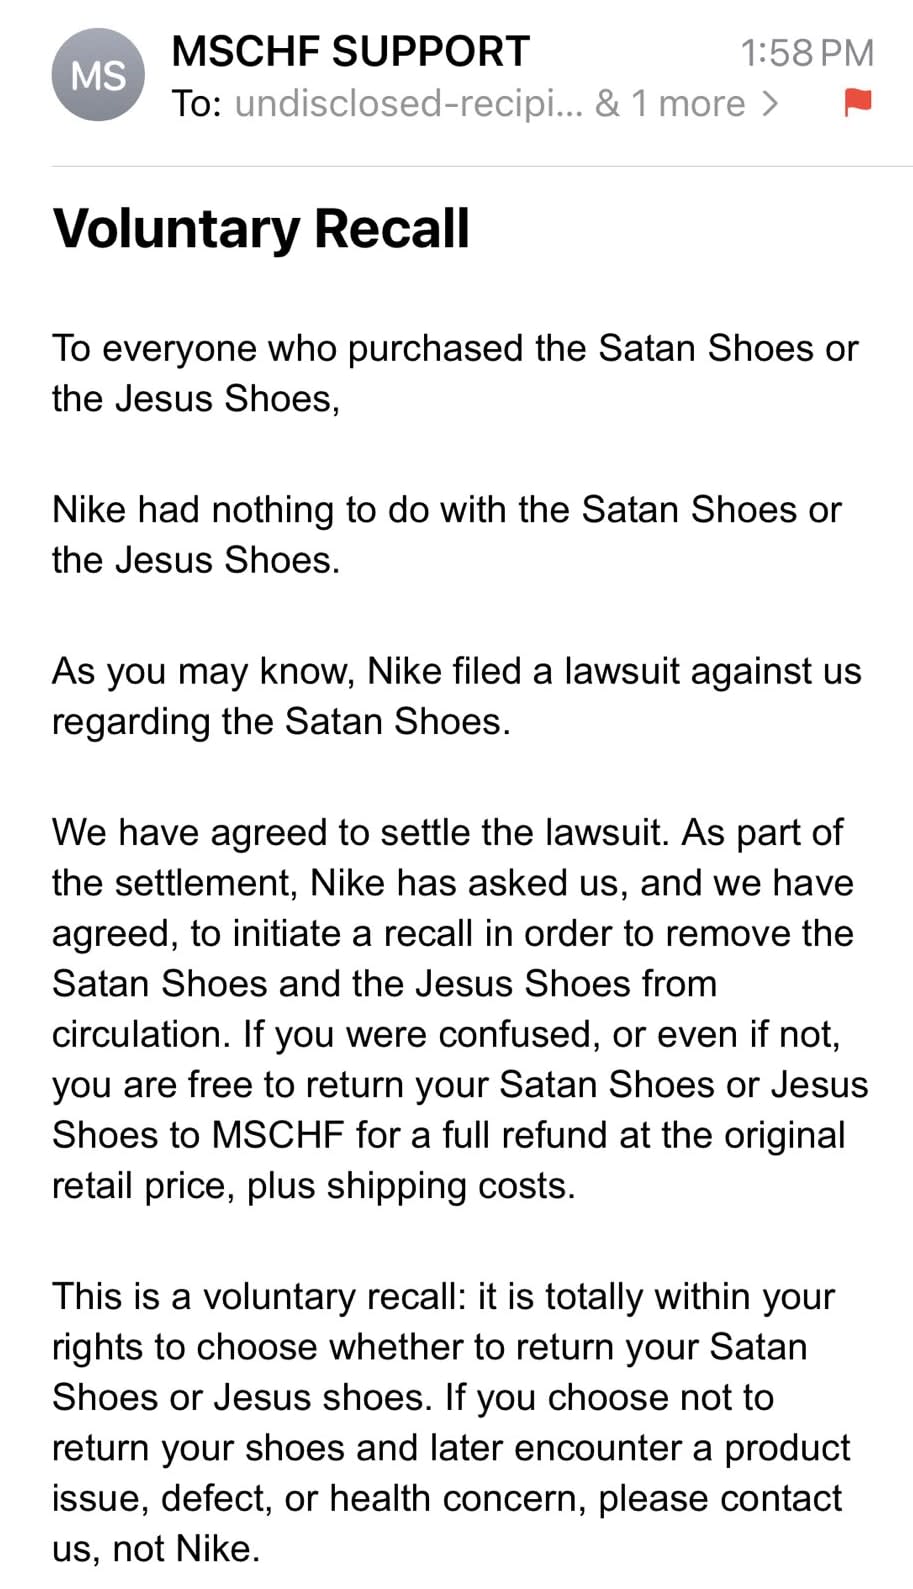 MSCHF Offers Refunds on Satan Shoes After